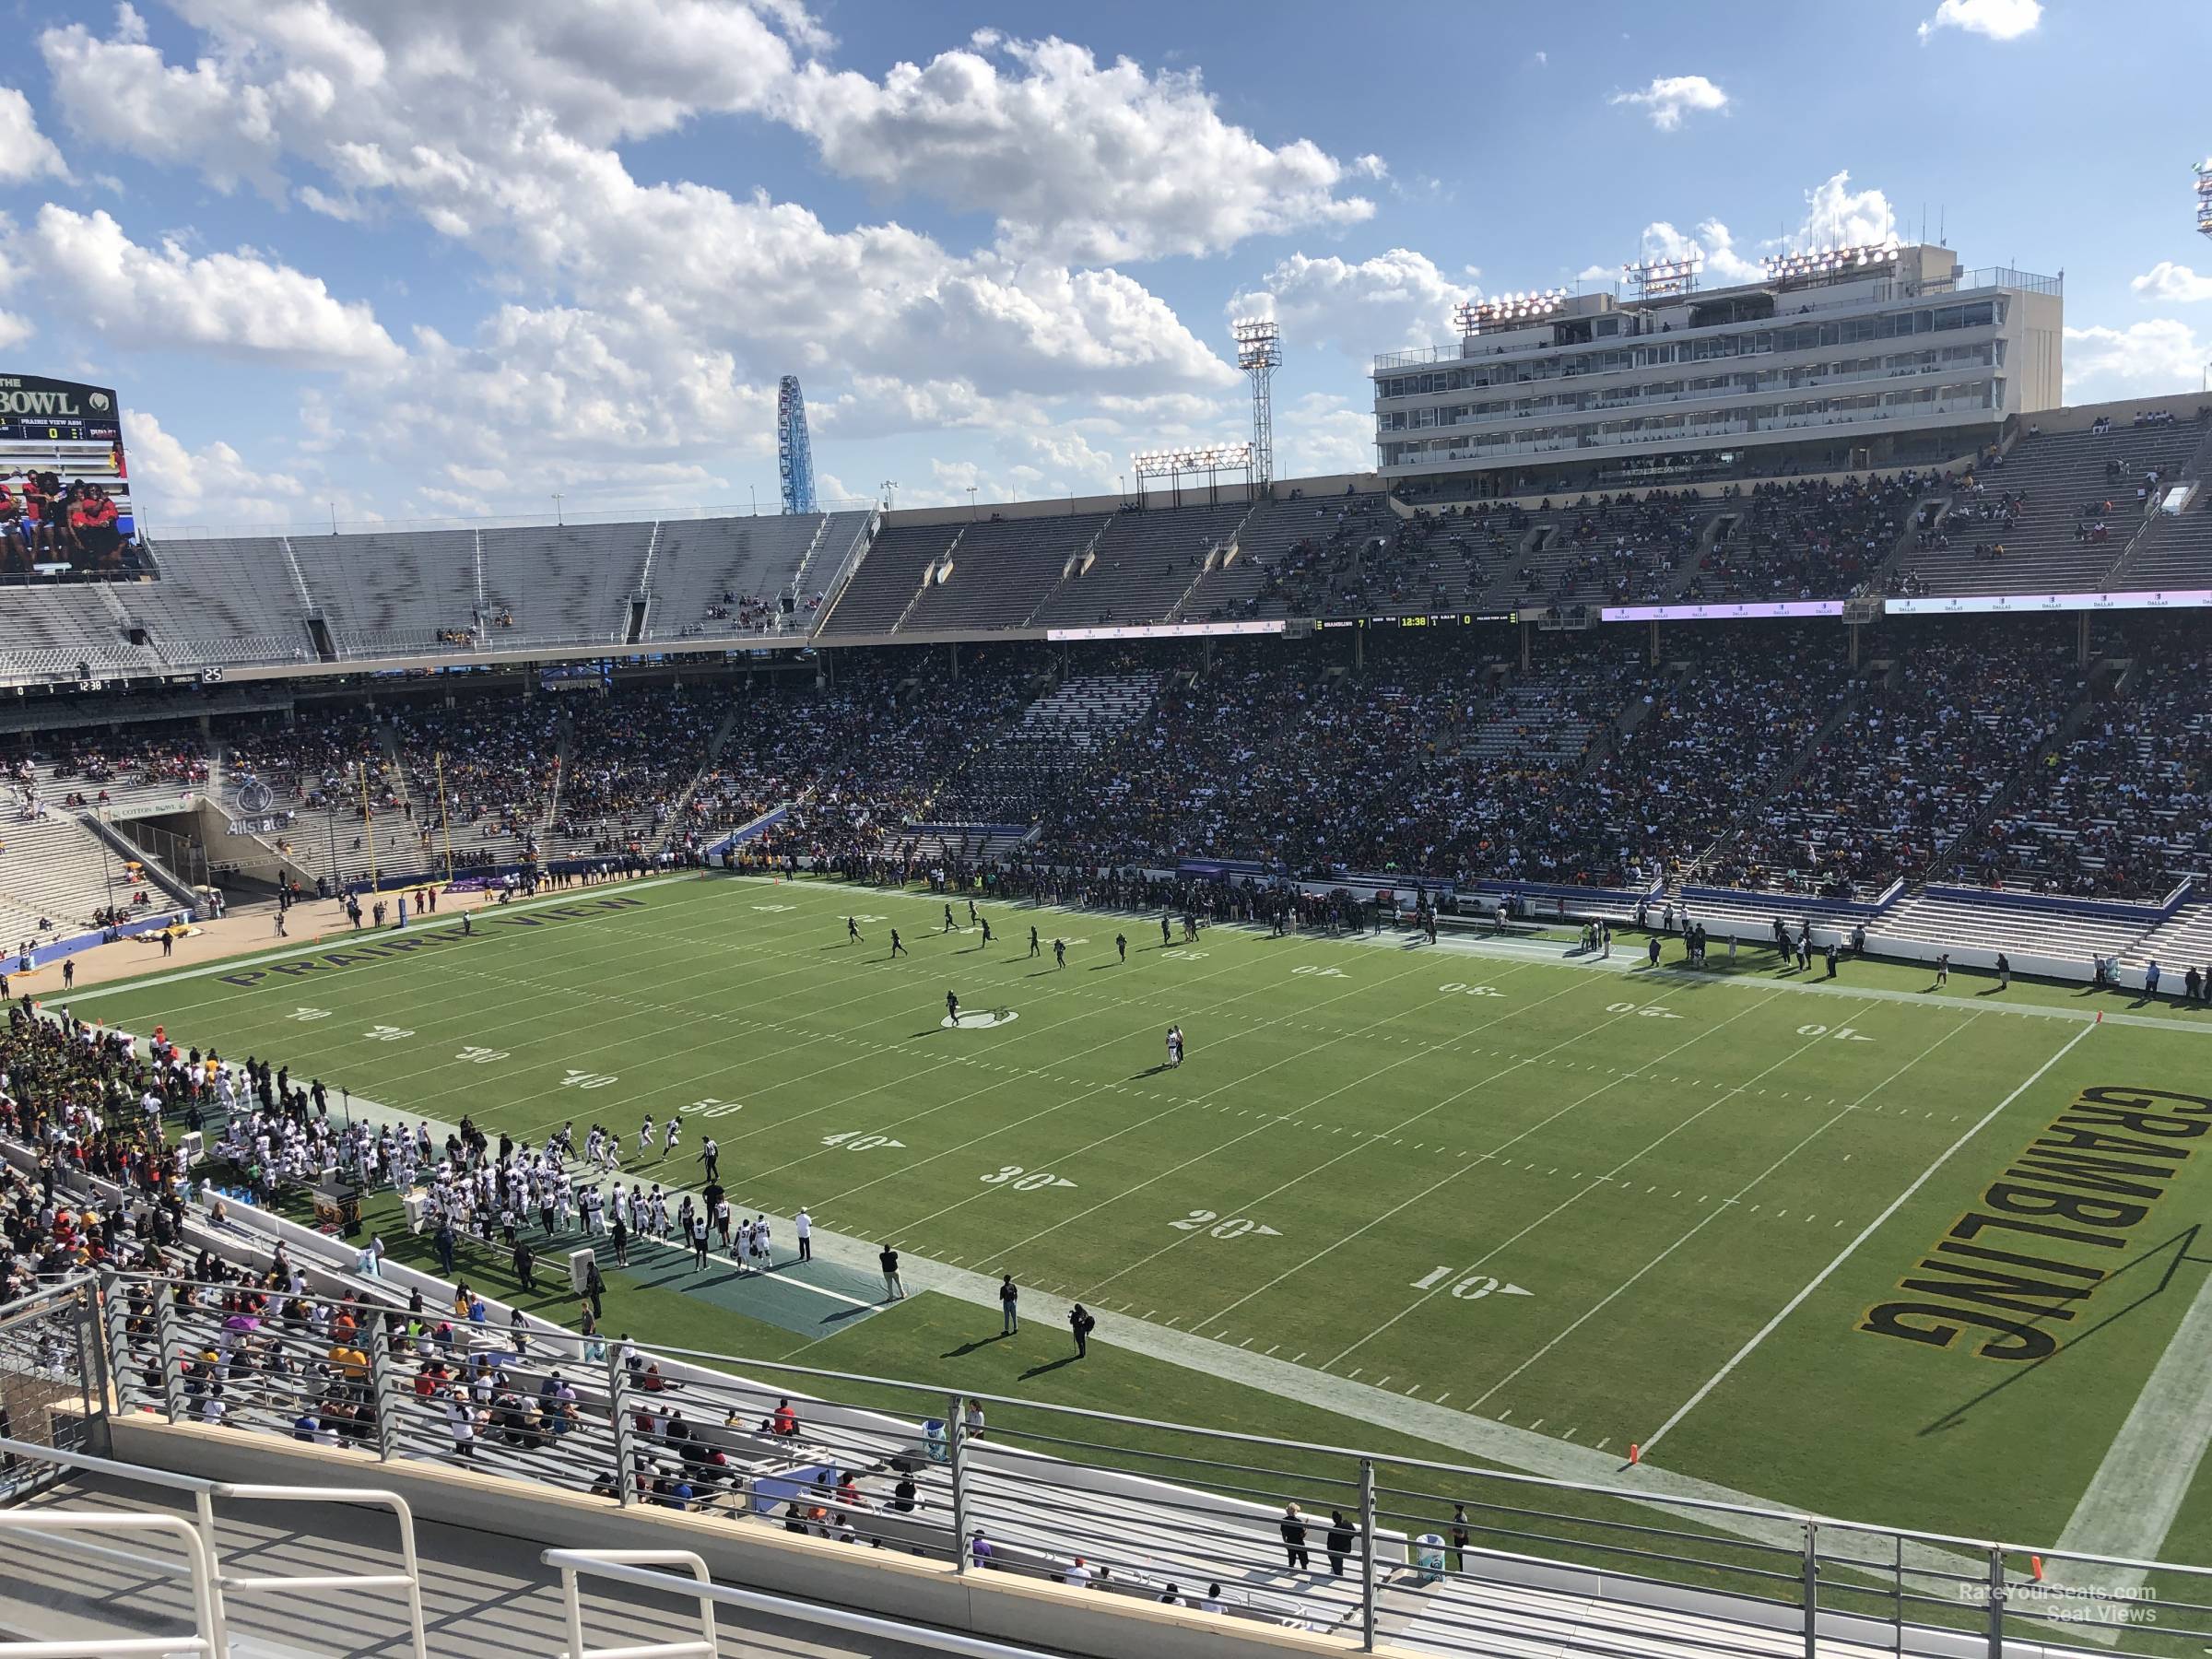 section 123, row 8 seat view  - cotton bowl